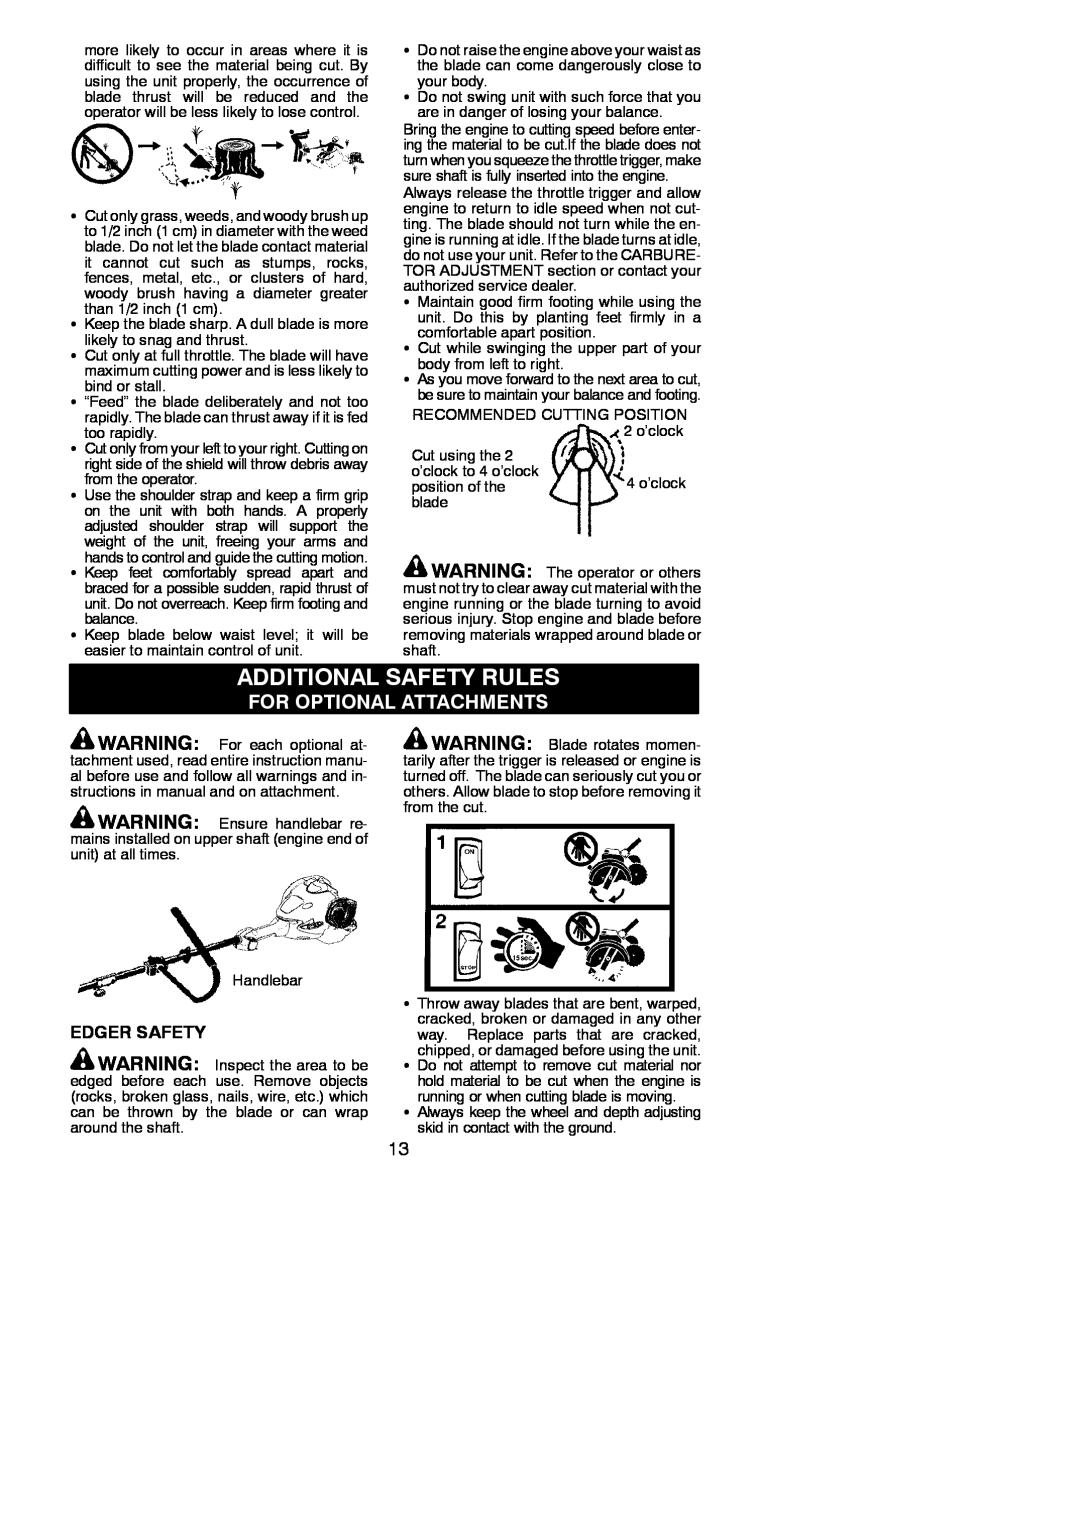 Poulan 952711880, 115274026 instruction manual Additional Safety Rules, For Optional Attachments, Edger Safety 